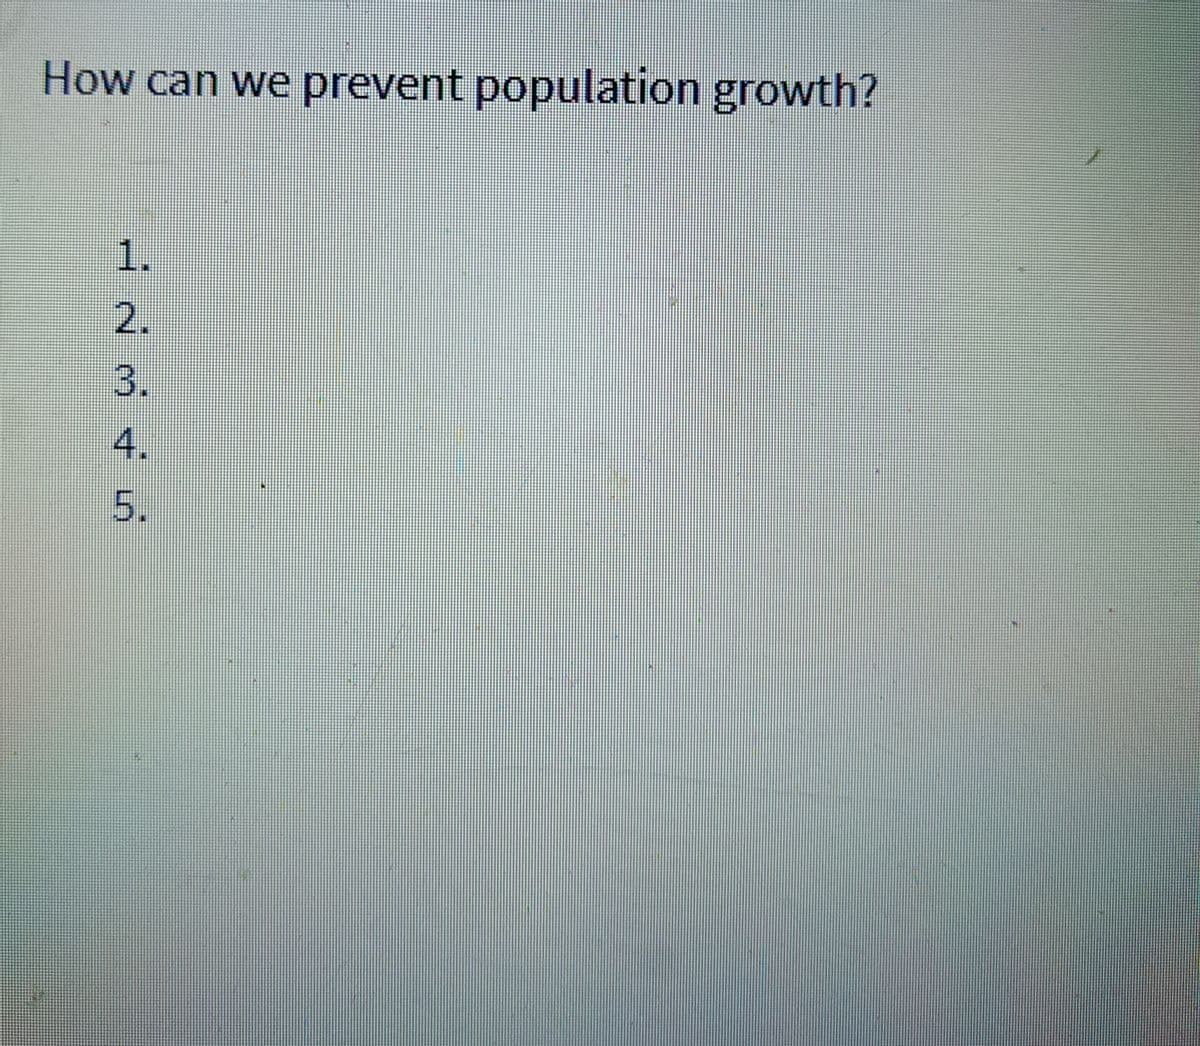 How can we prevent population growth?
UAWN H
2.
4.